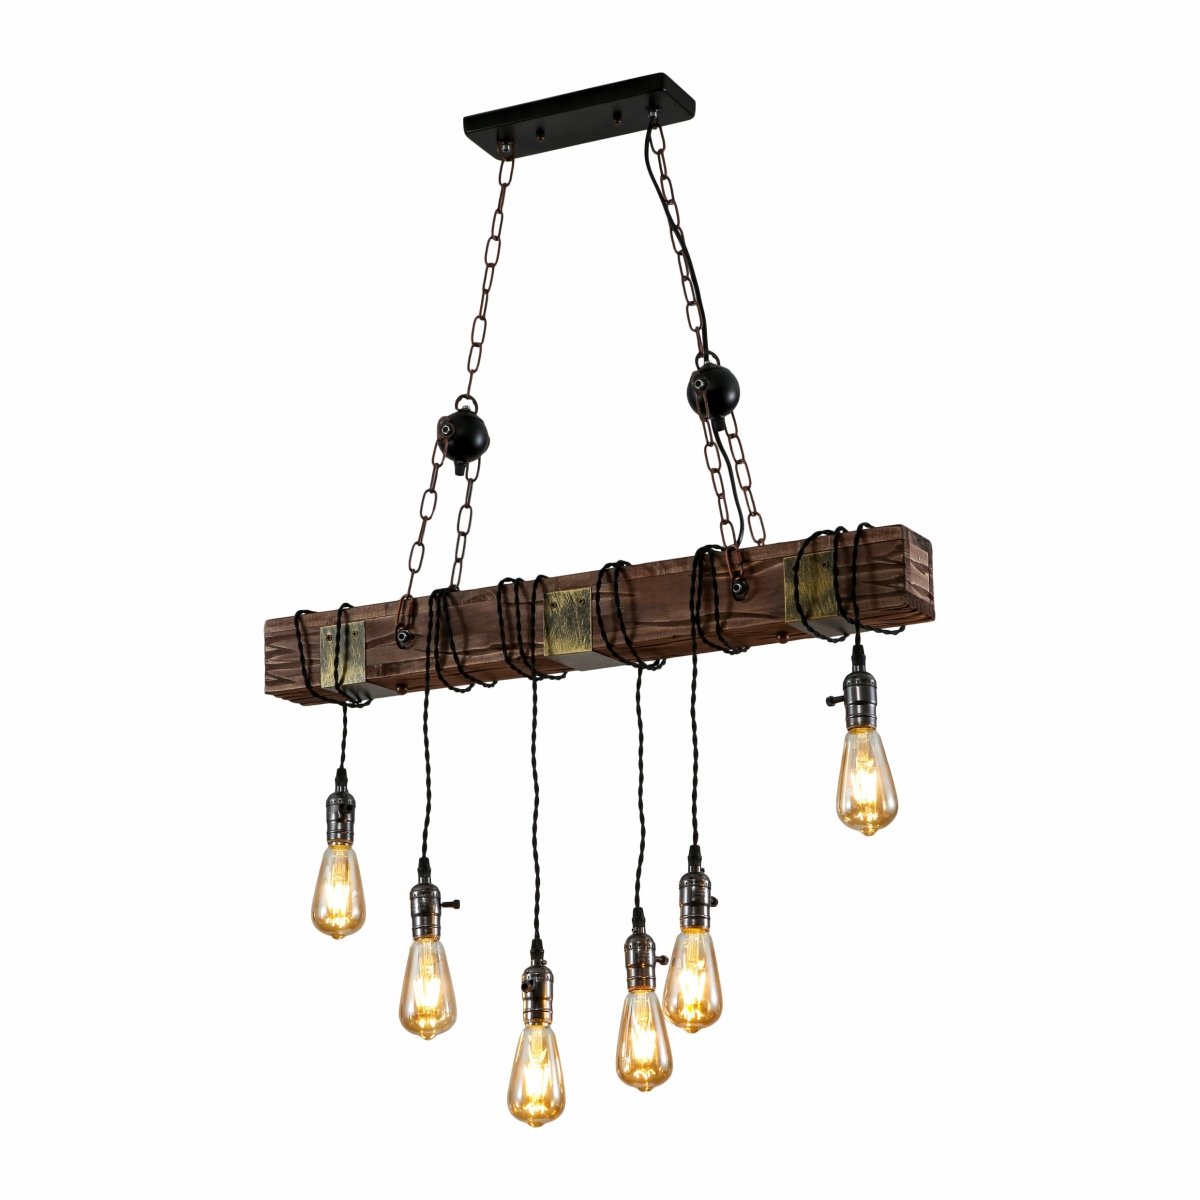 Main image of Timber Iron and Wood Island Chandelier 6xE27 | TEKLED 159-17856